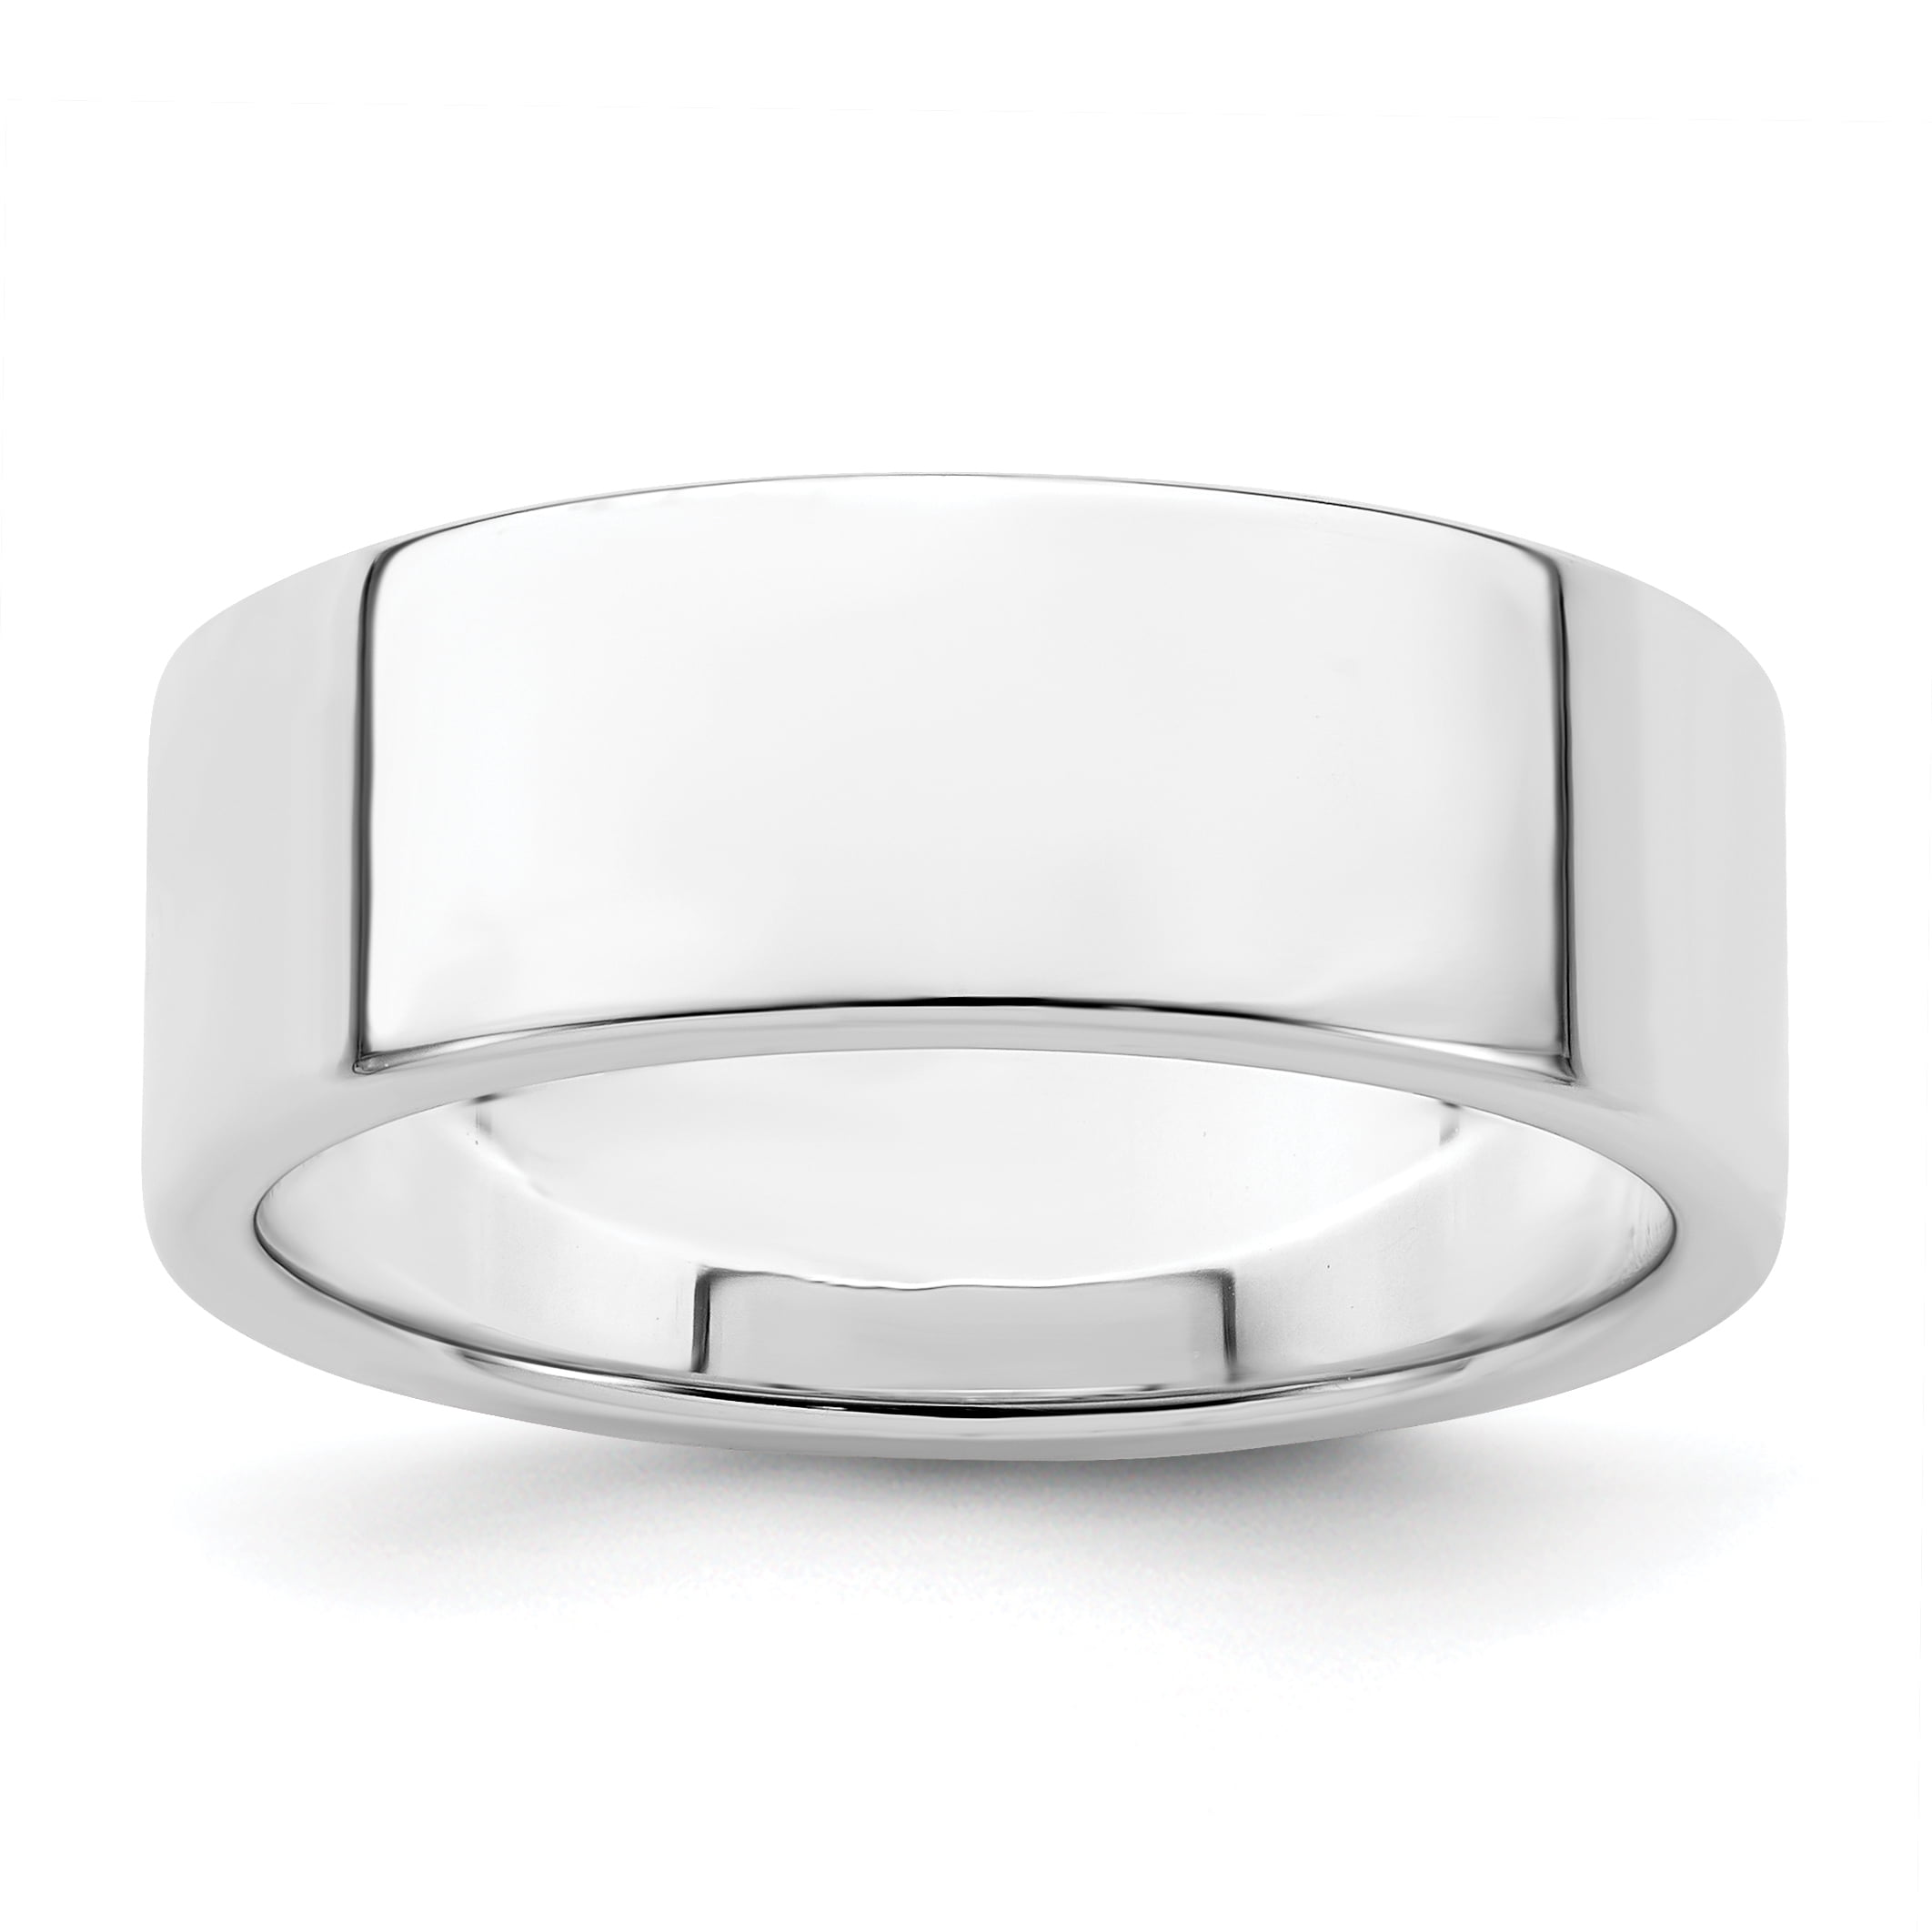 Sterling Silver 7mm Flat Band 